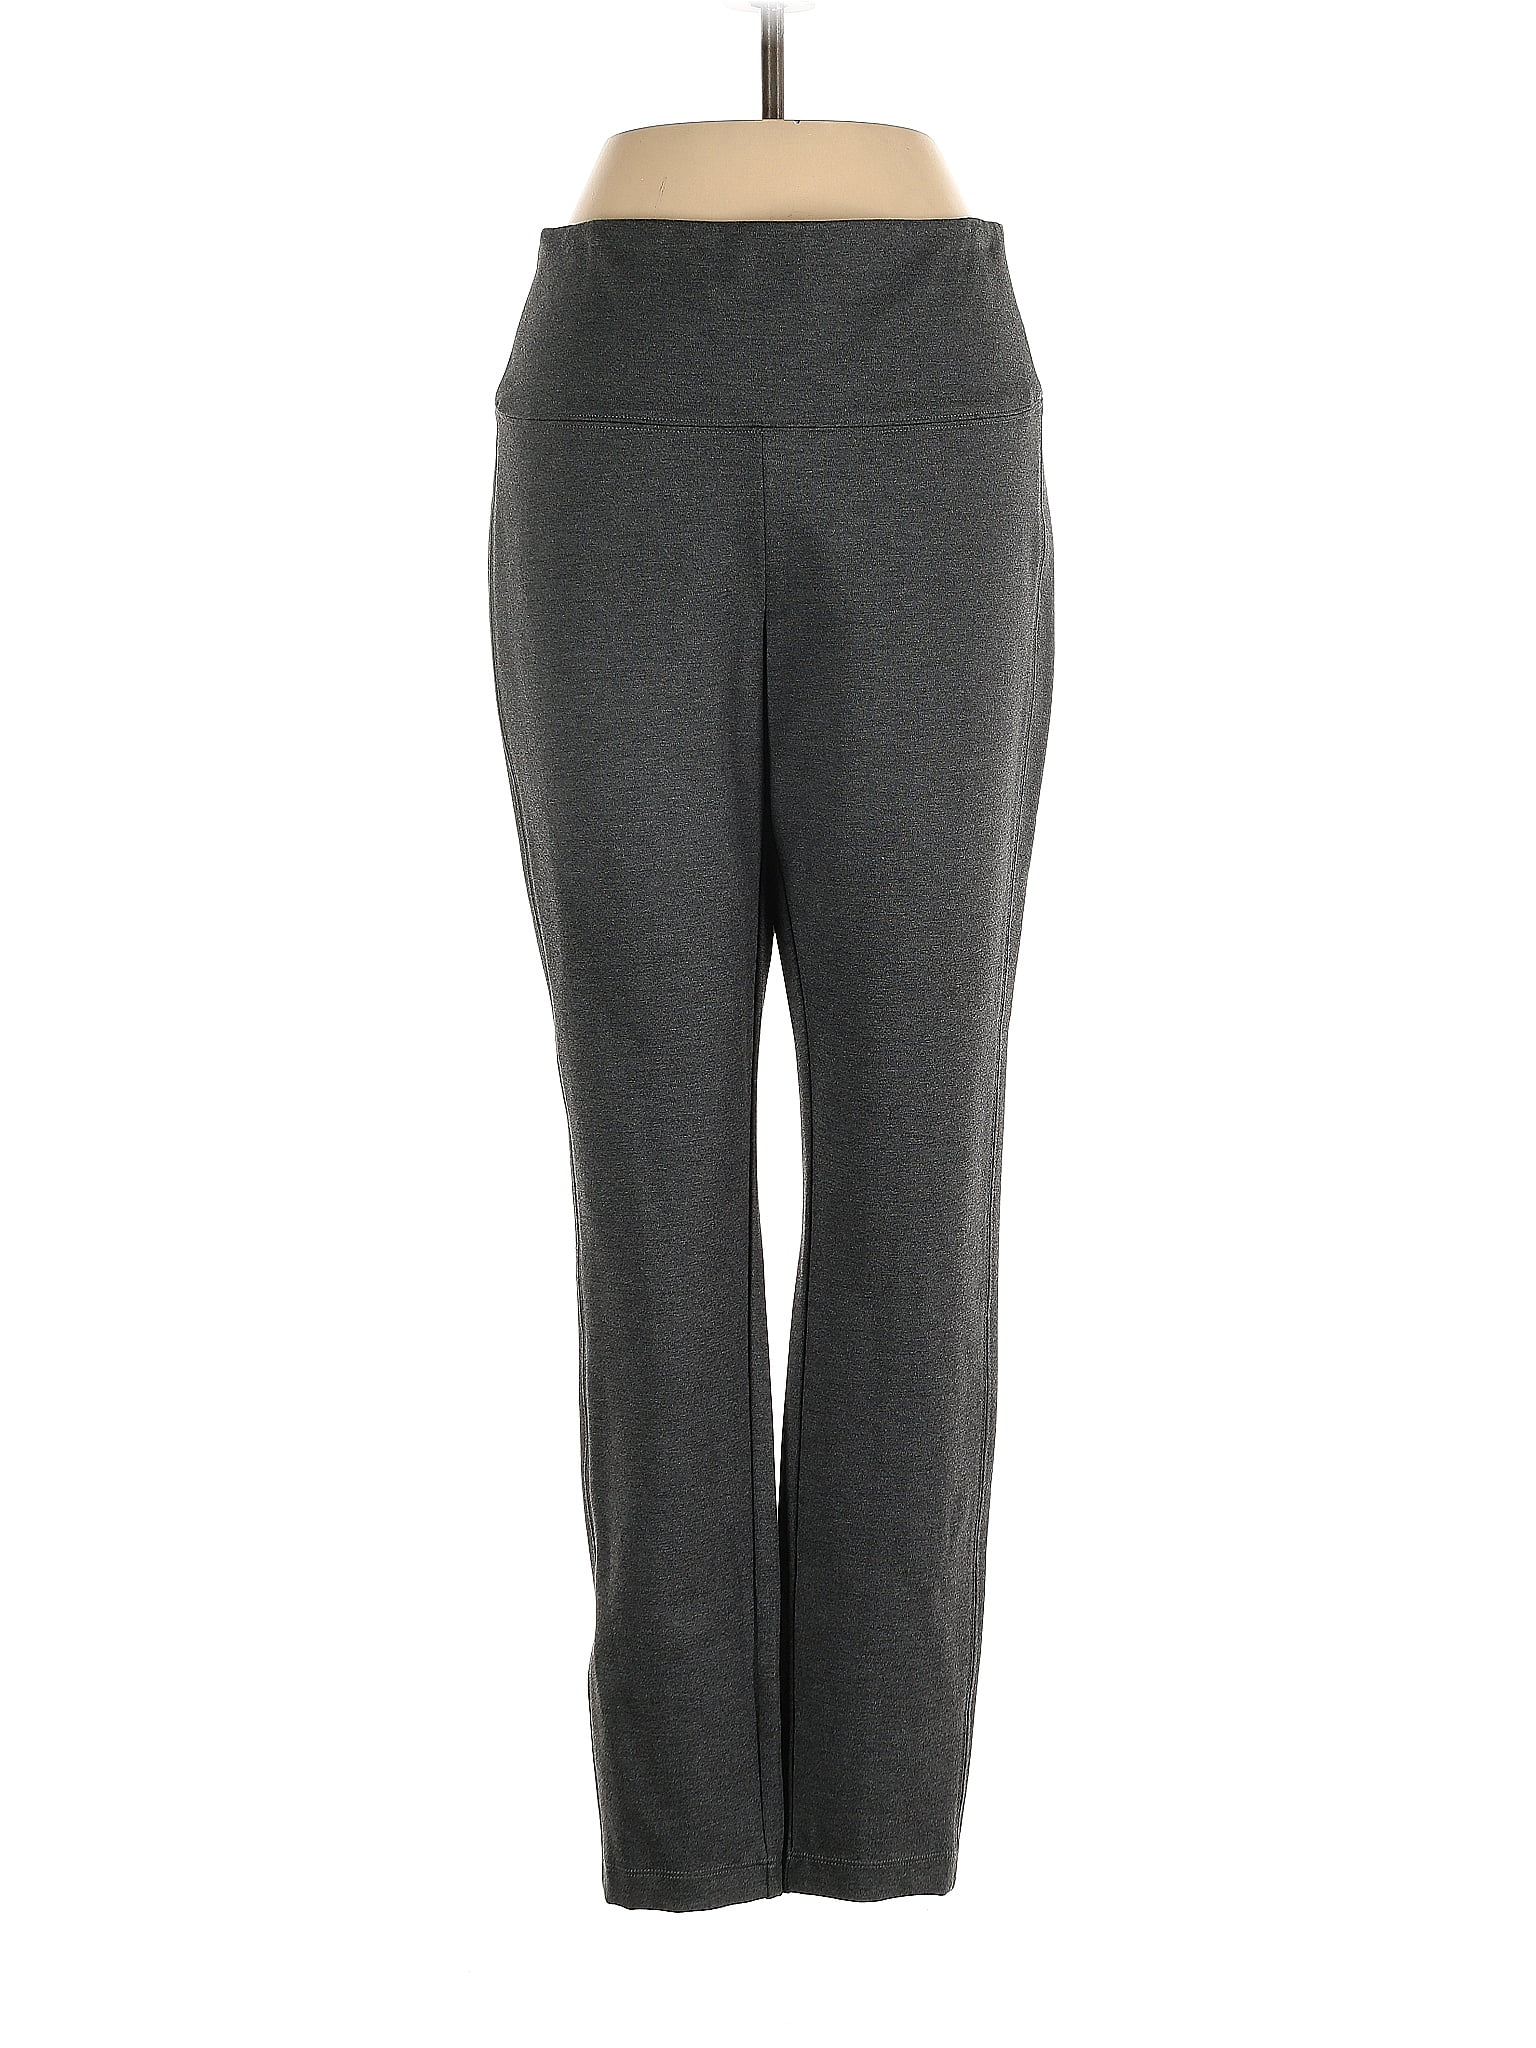 Zyia Active Gray Active Pants Size 8 - 10 - 63% off